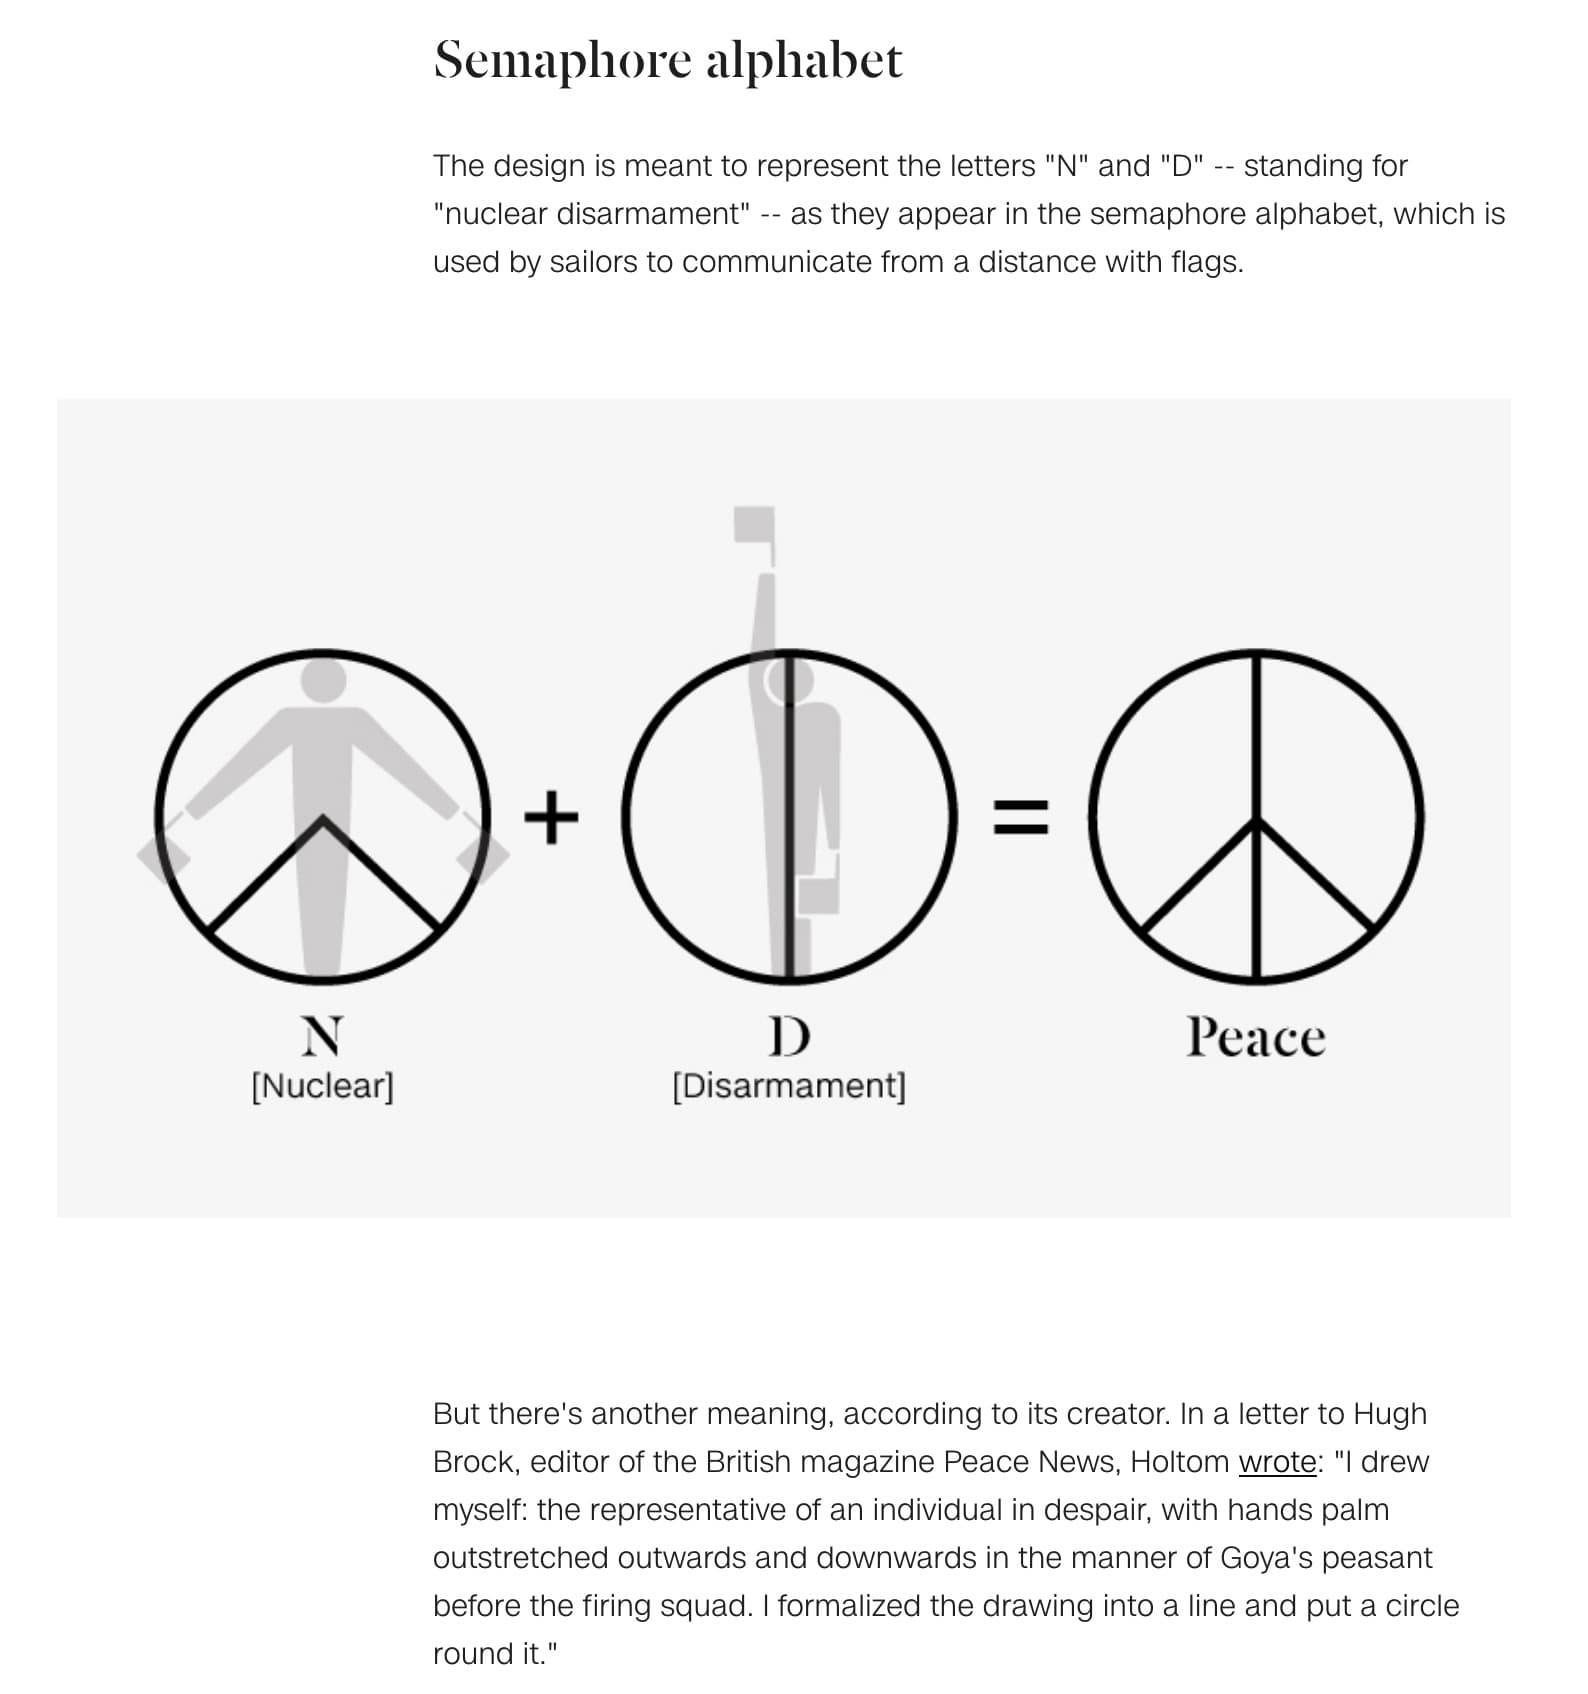 https://edition.cnn.com/style/article/style-origins-peace-symbol/index.html